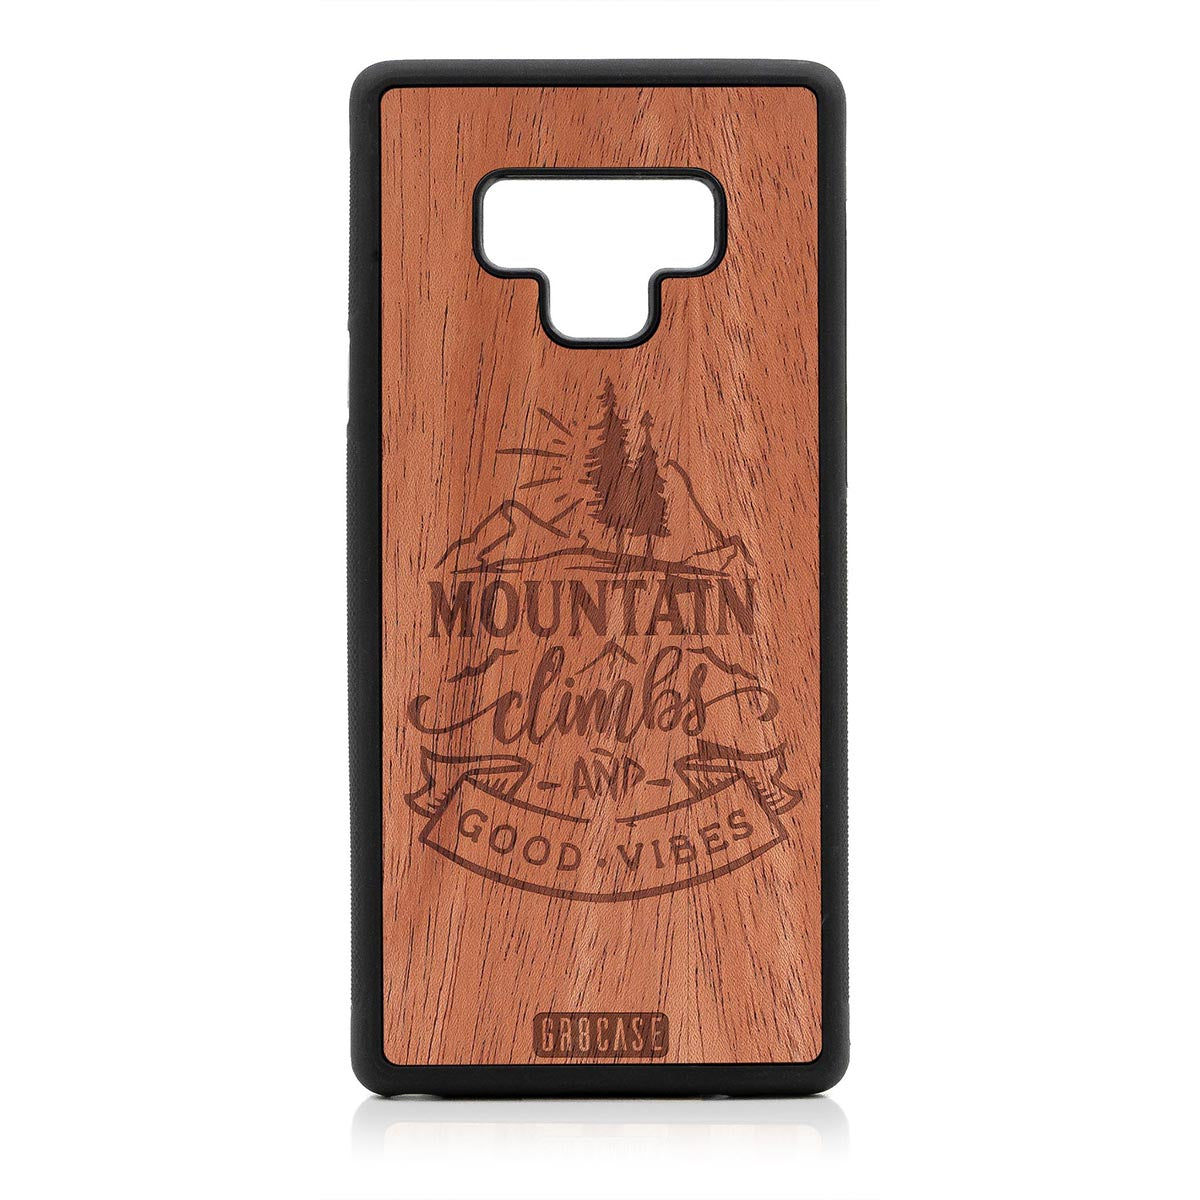 Mountain Climbs And Good Vibes Design Wood Case Samsung Galaxy Note 9 by GR8CASE